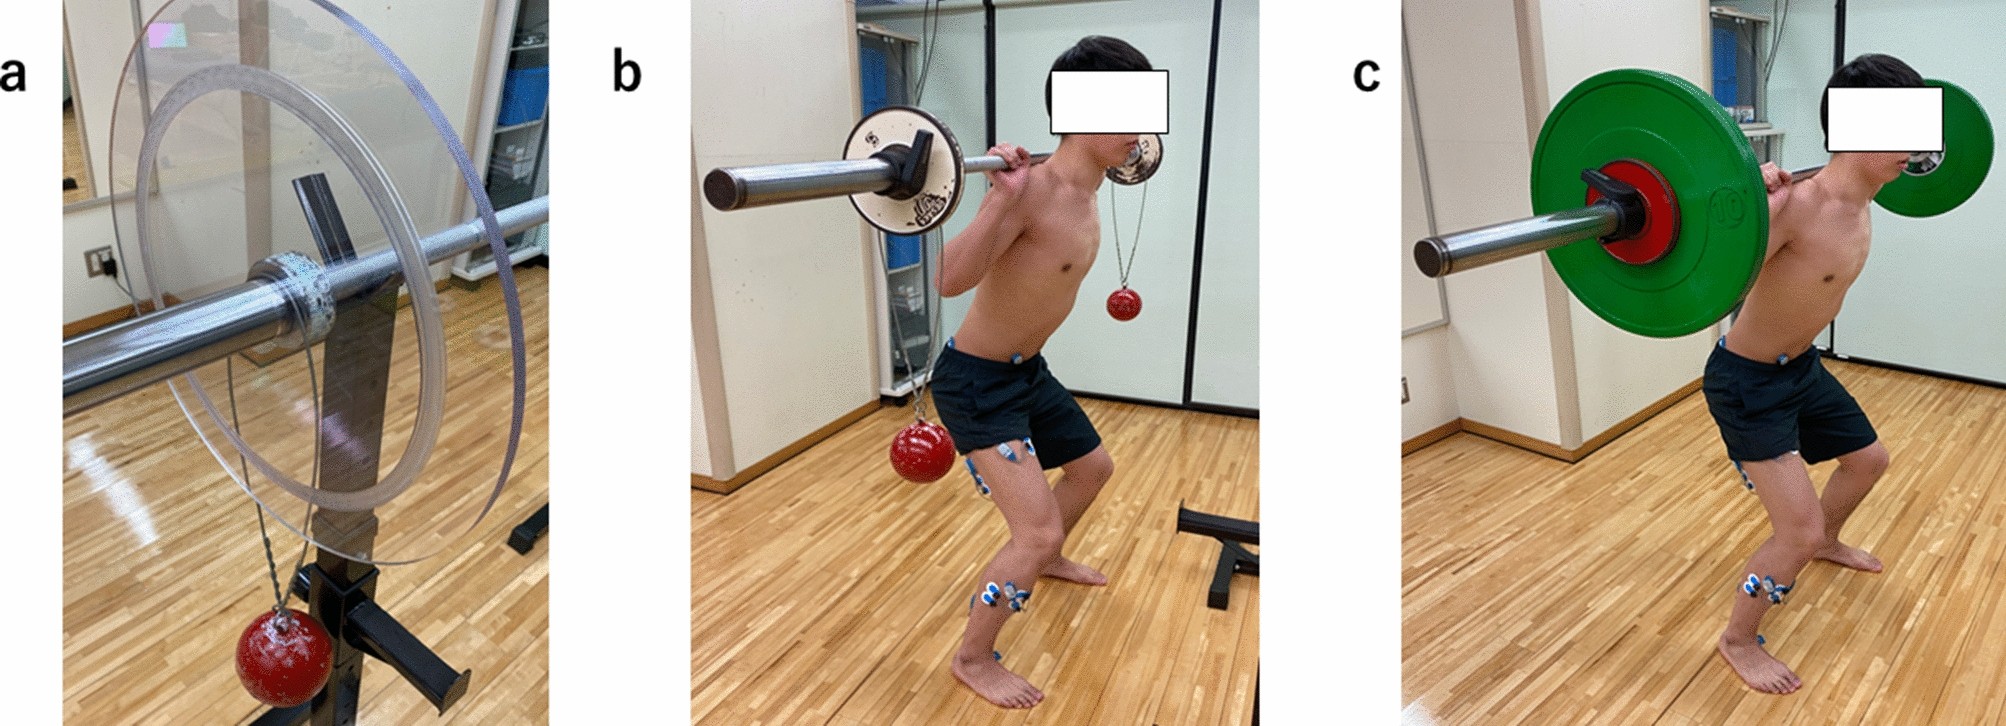 Differences in trunk and lower extremity muscle activity during squatting  exercise with and without hammer swing